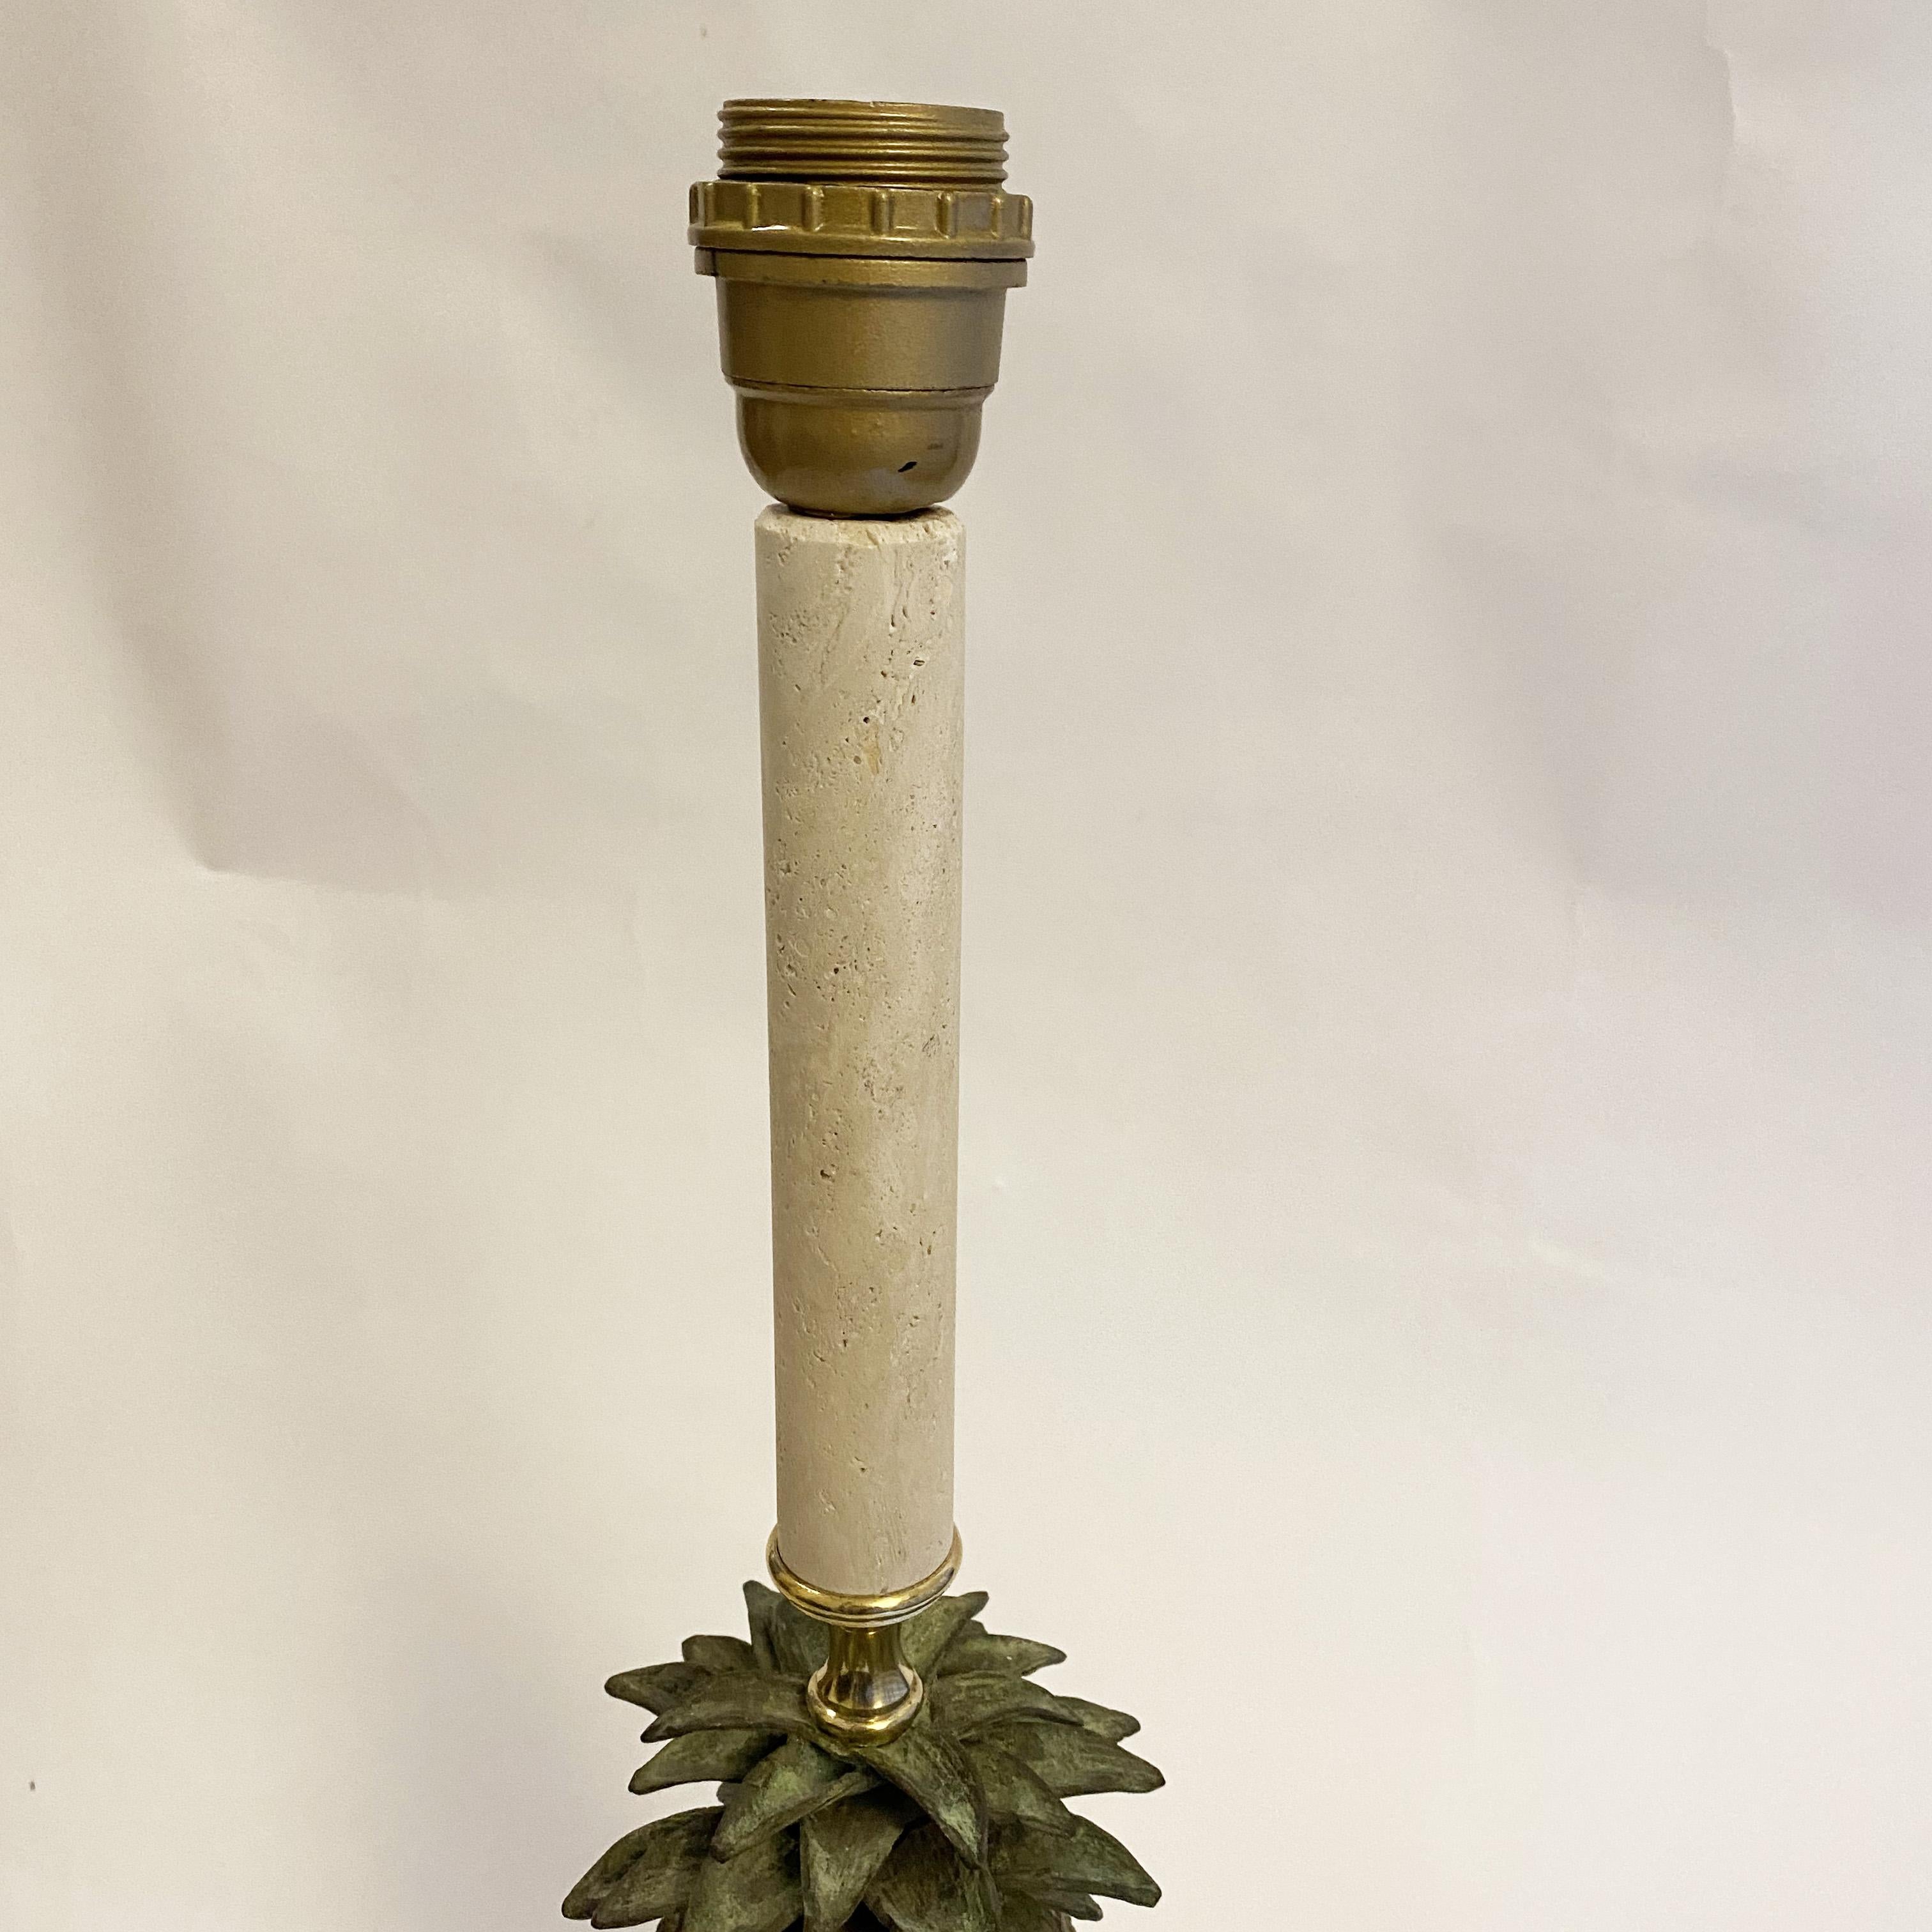 Hollywood Regency Pineapple Table Lamp in Patined Bronze and Travertine, 1970s For Sale 1